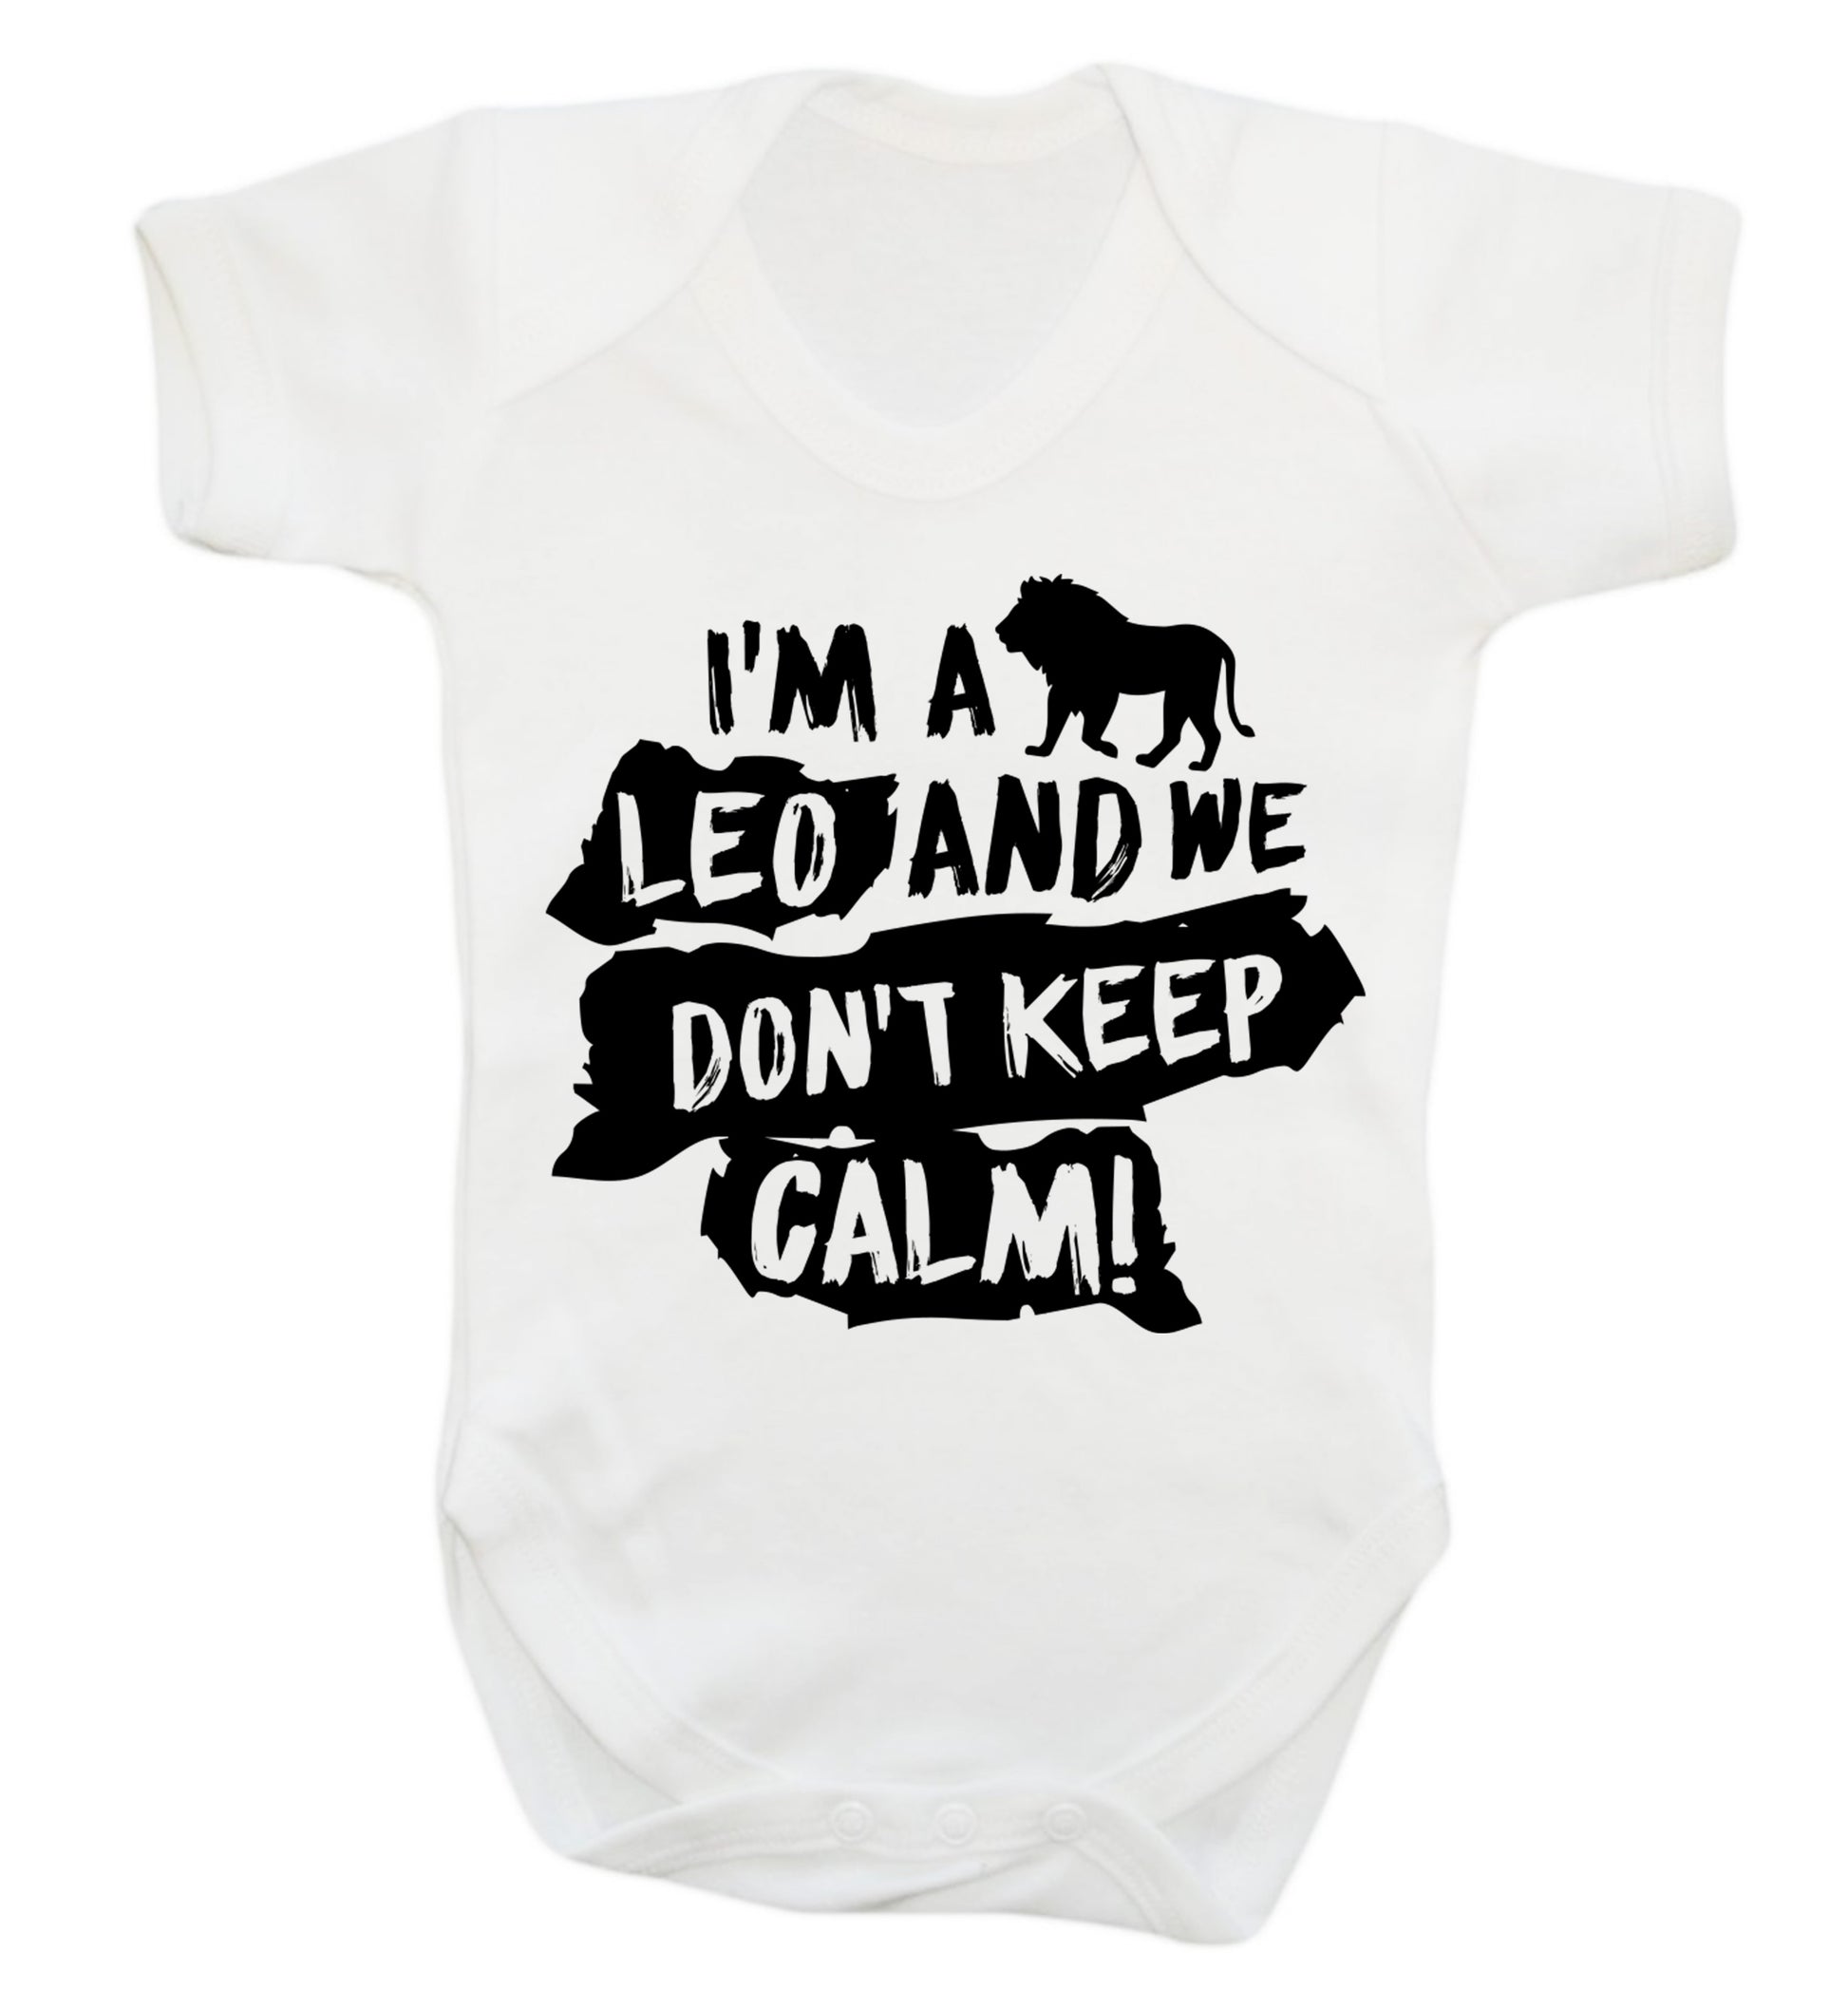 I'm a leo and we don't keep calm! Baby Vest white 18-24 months